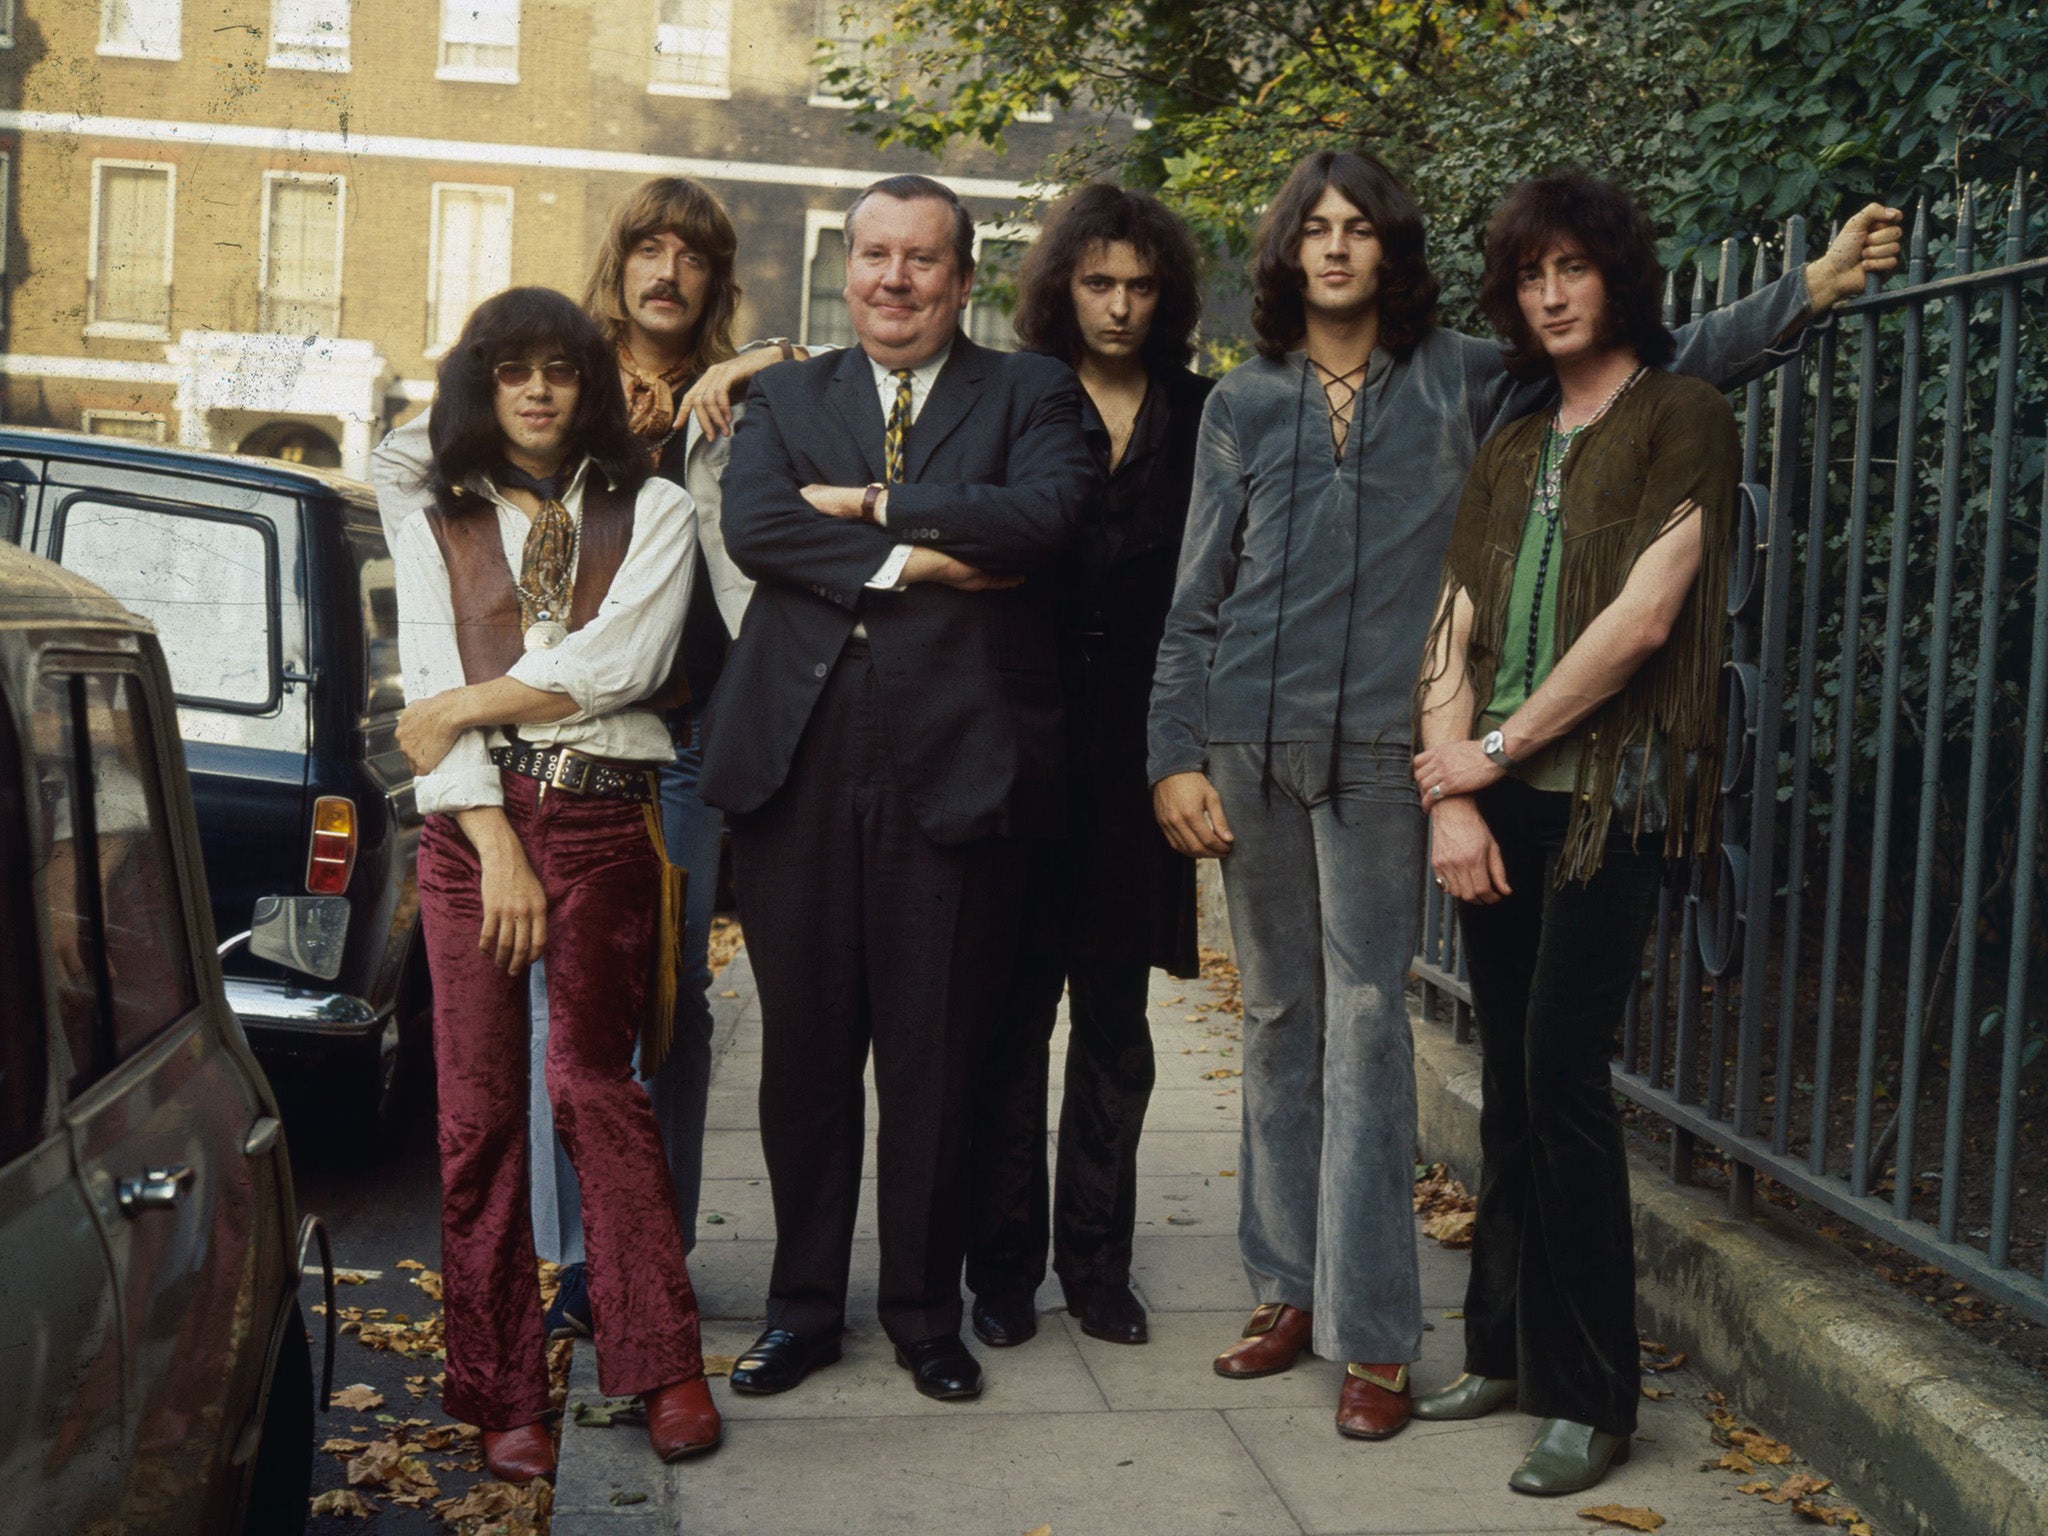 English composer Sir Malcolm Arnold (third left) conducted the Royal Philharmonic Orchestra alongside Deep Purple (Getty)